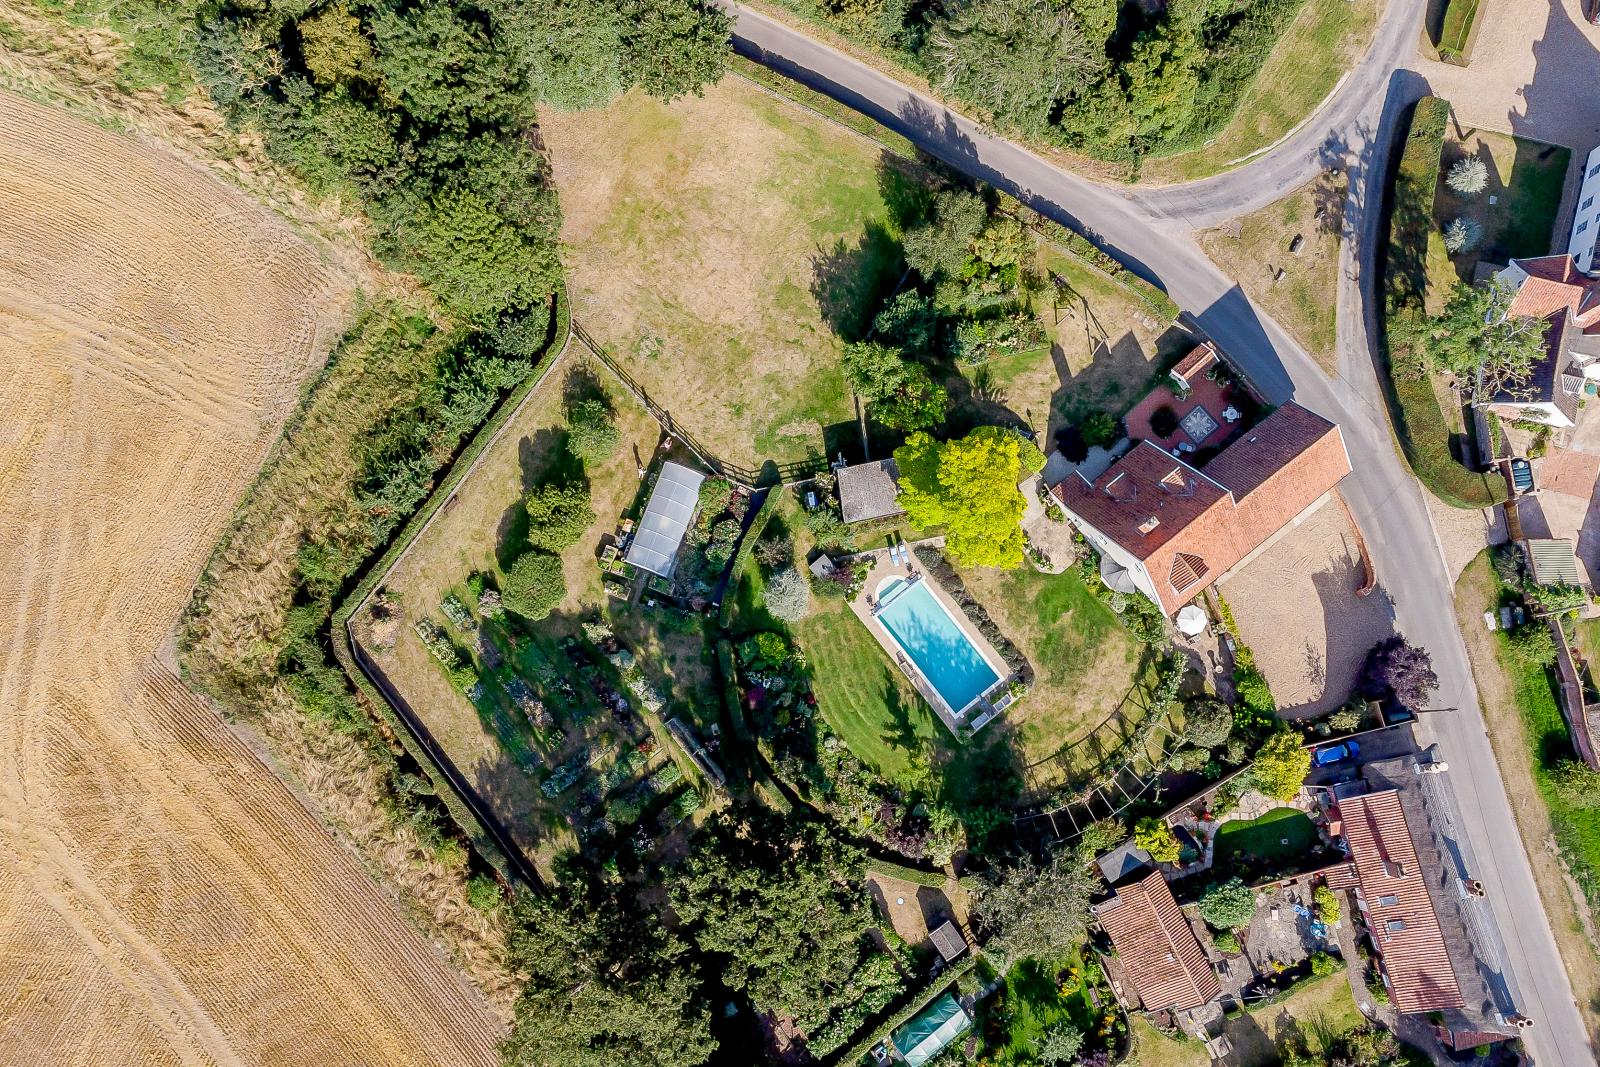 Drone technology – a game changer for property marketing